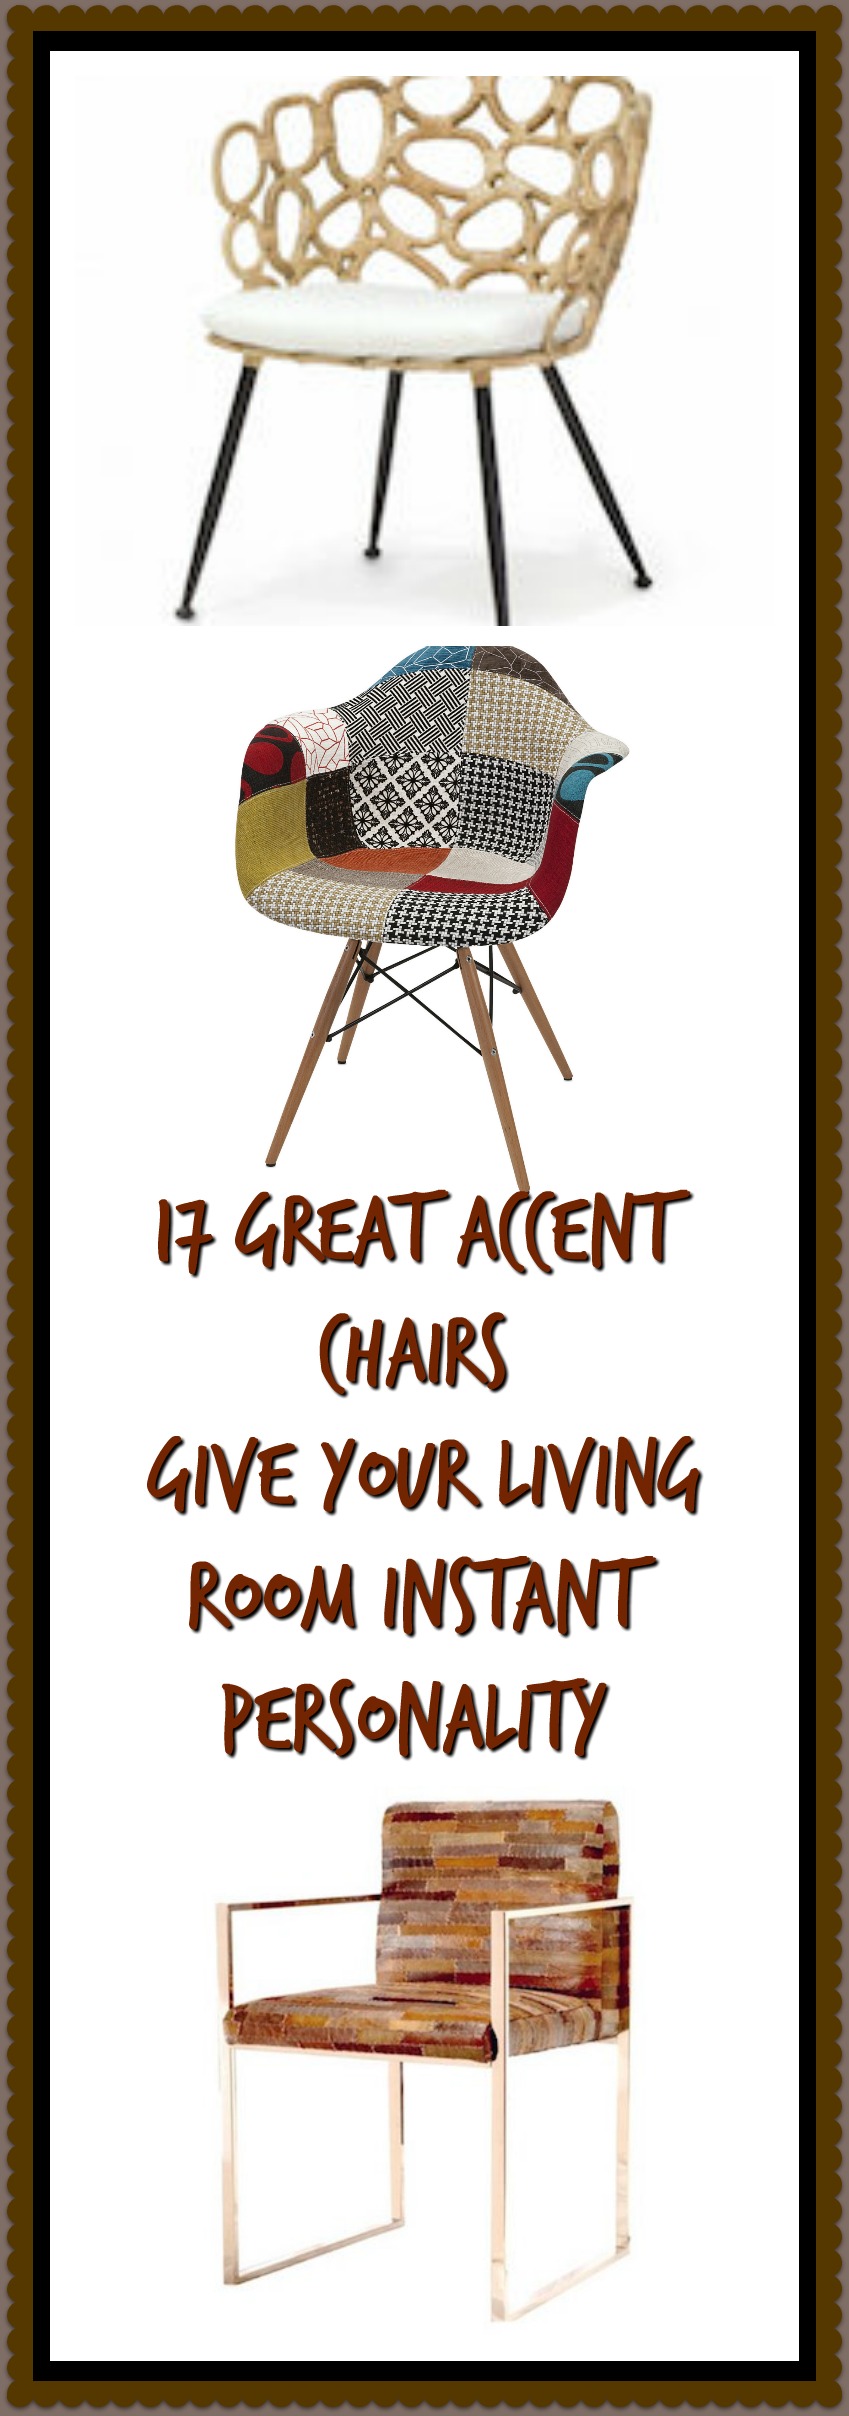 Accent Chairs from DeliciousPerspective.com